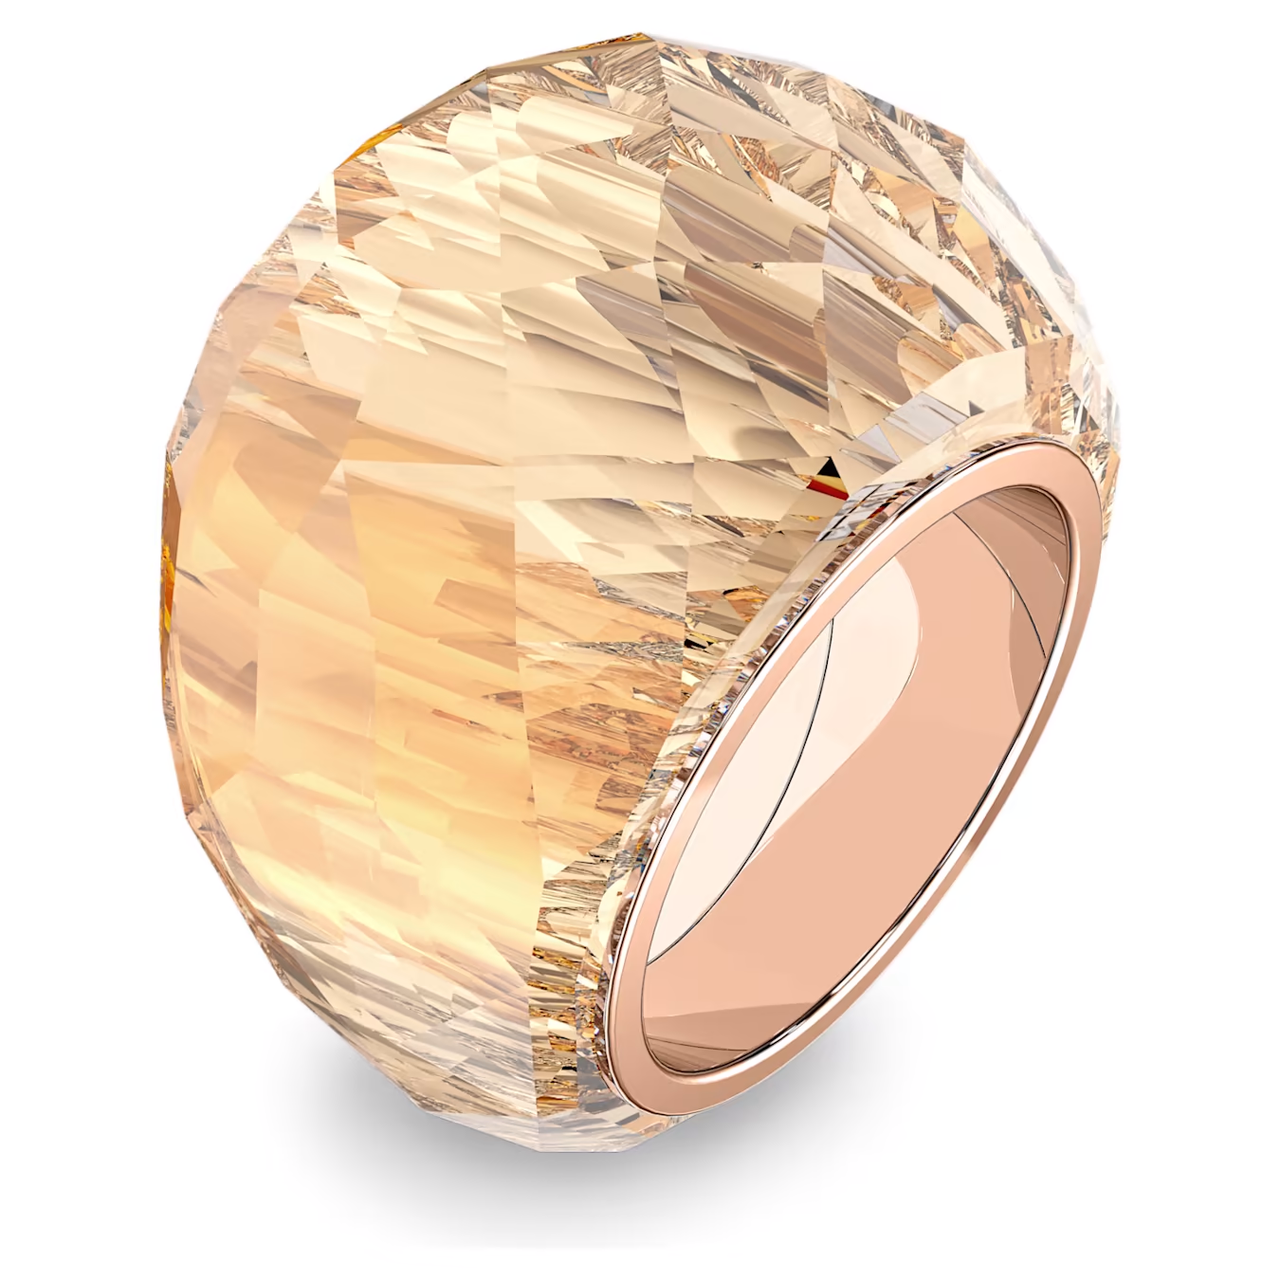 Swarovski Creativity Wide Ring rose gold | Wide rings, Rose gold ring,  Simple band